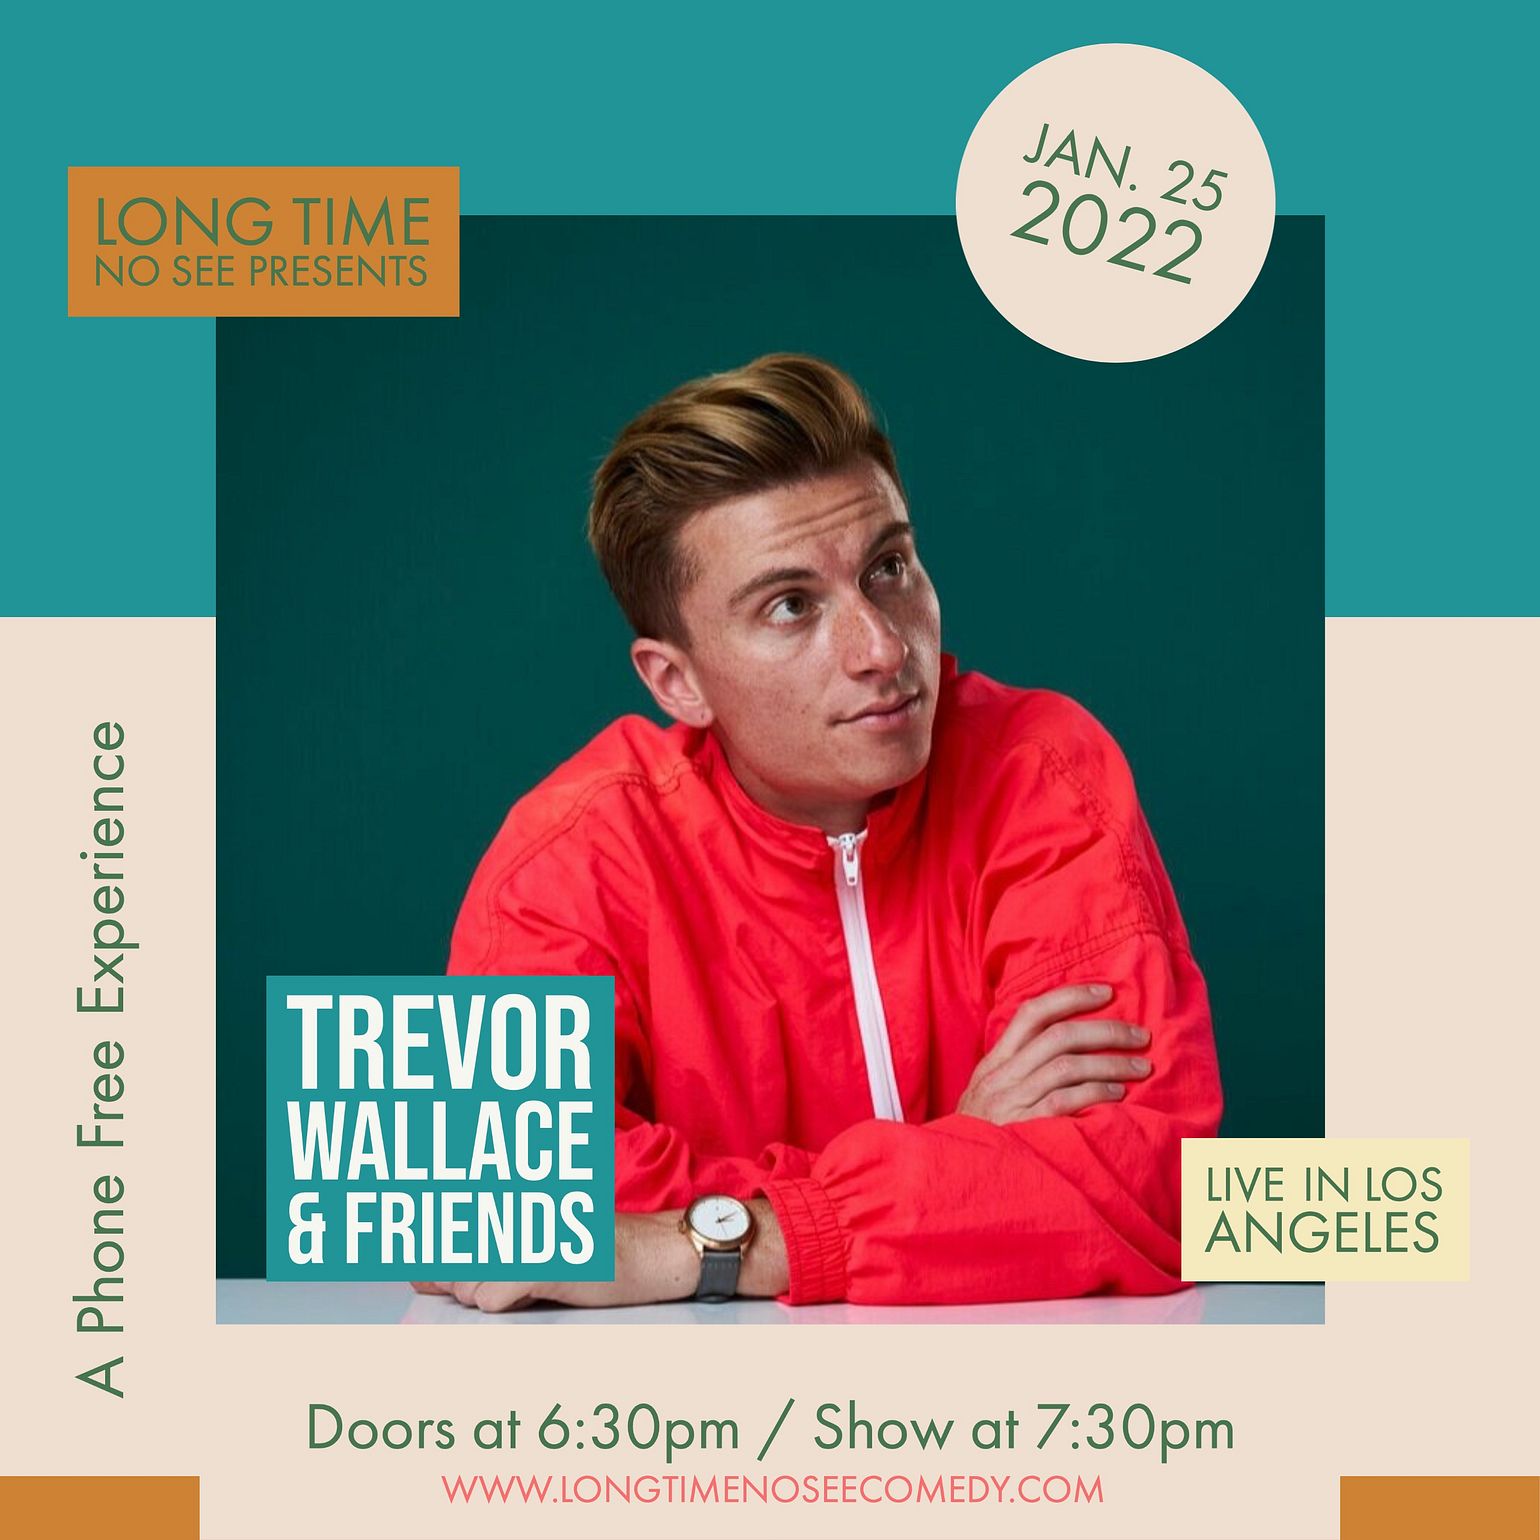 Trevor Wallace & Friends Tickets at El Cid in Los Angeles by Long Time